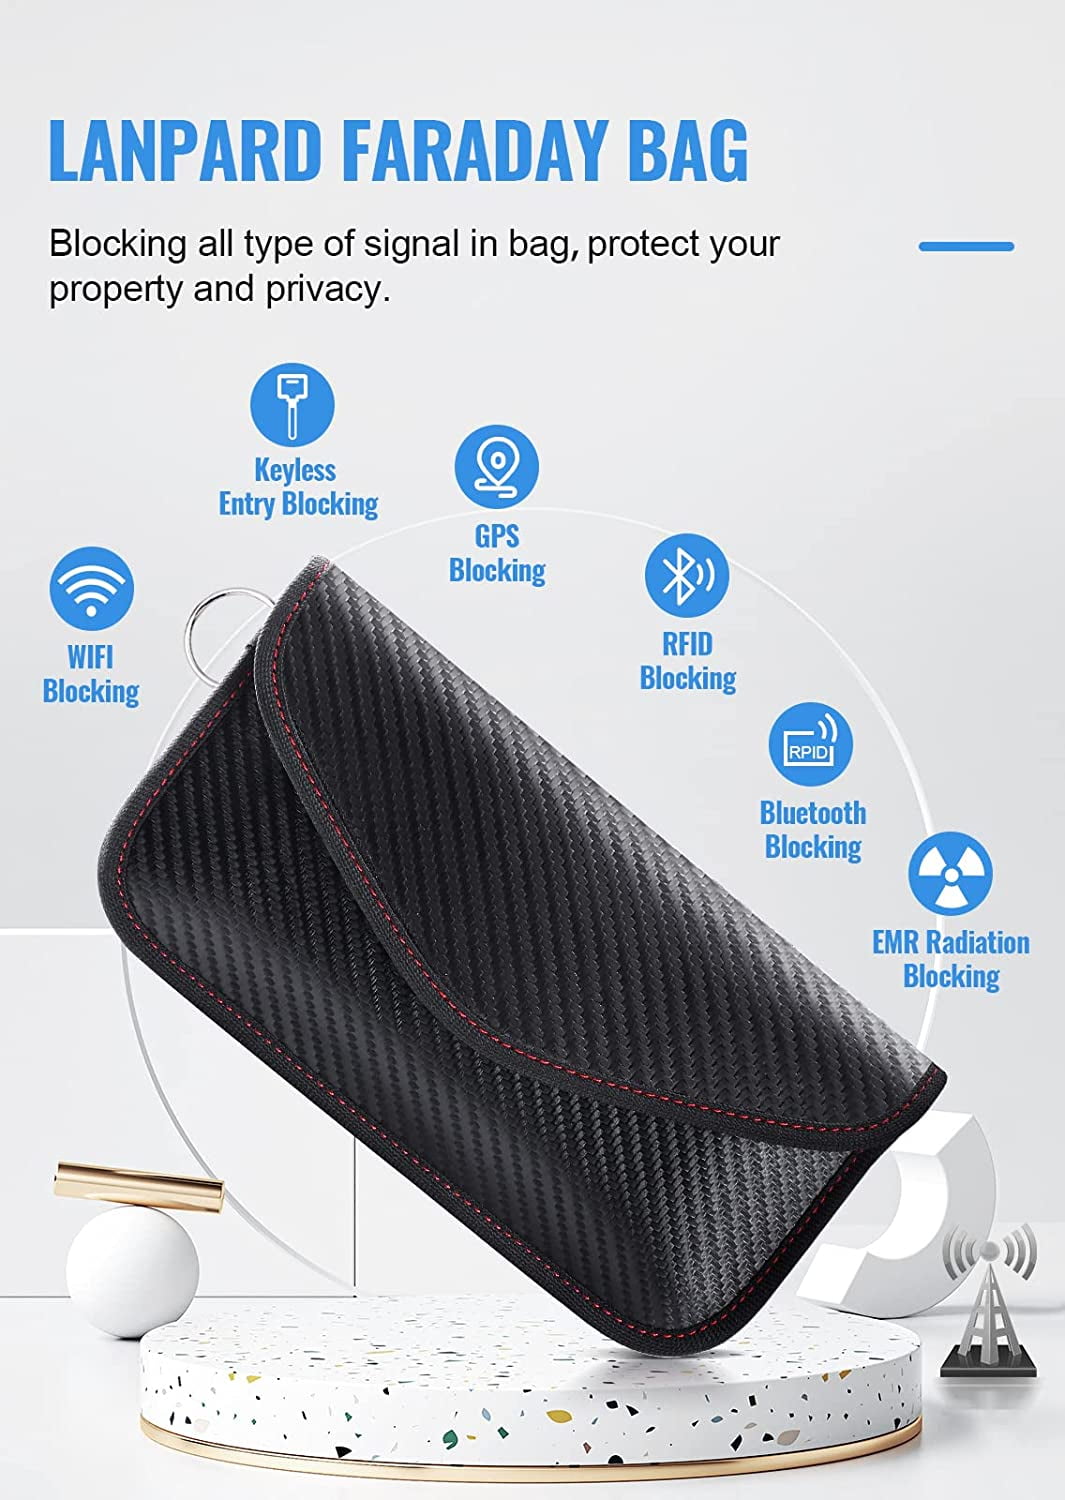  lanpard Faraday Bag for Phones and Car Keys, 2 Pack RFID Signal  Blocking Bag, Carbon Fiber Material Shielding Case for Cell Phone Privacy  Protection & Key Fob, Anti-Tracking Anti-Hacking Case Blocker 